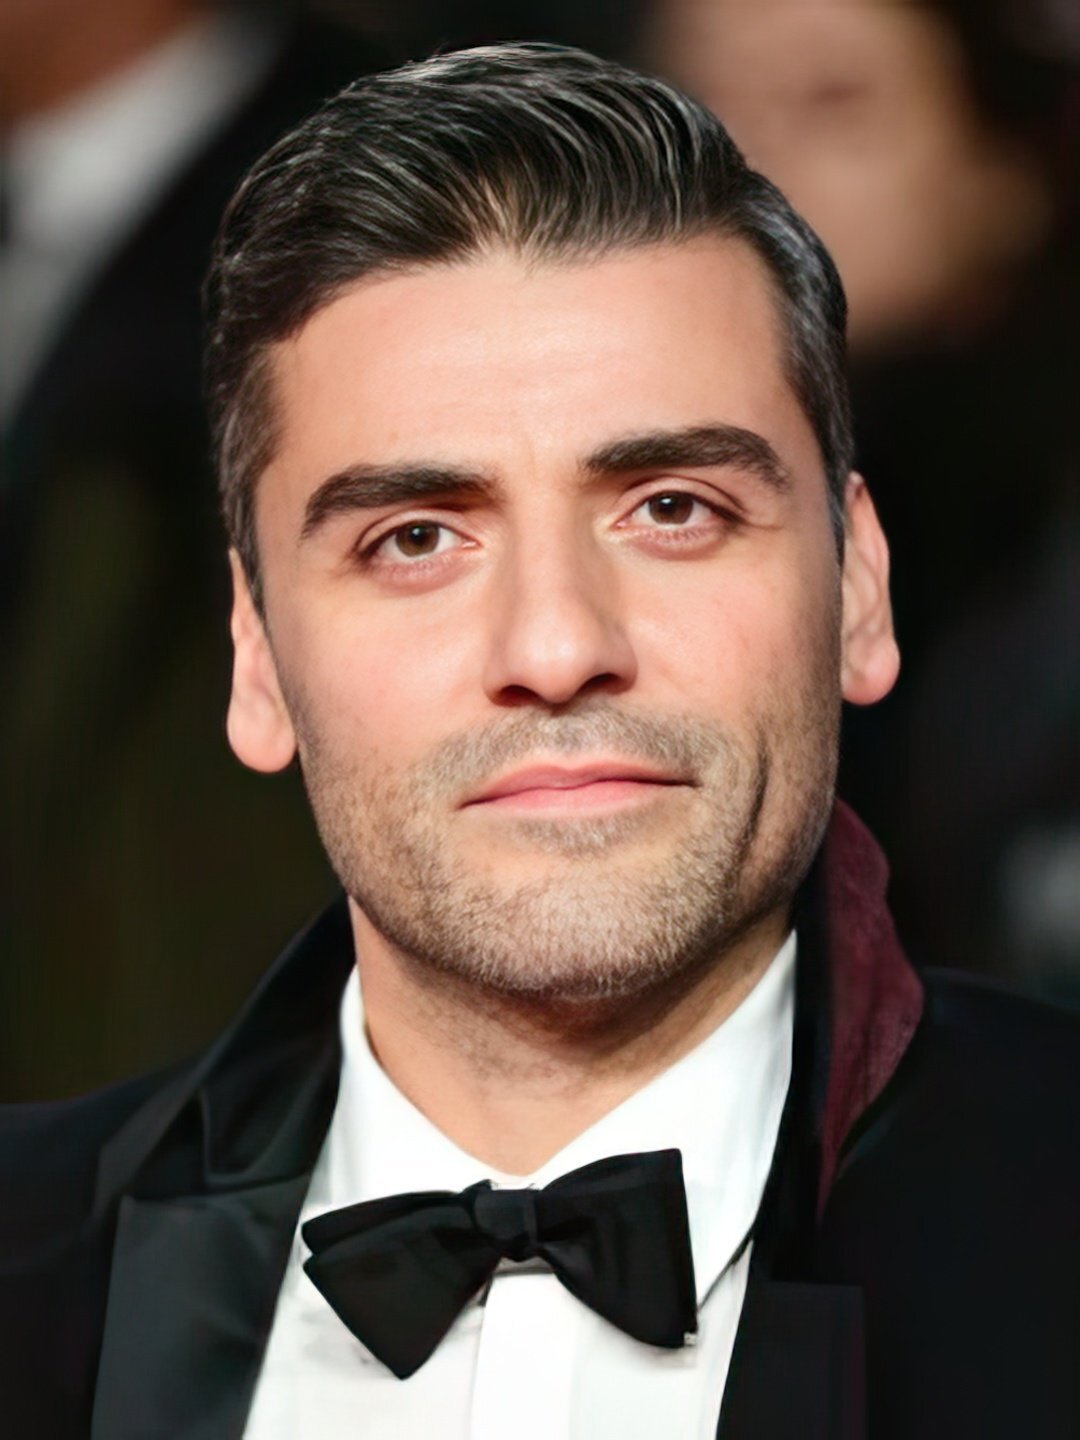 Oscar Isaac does he have kids